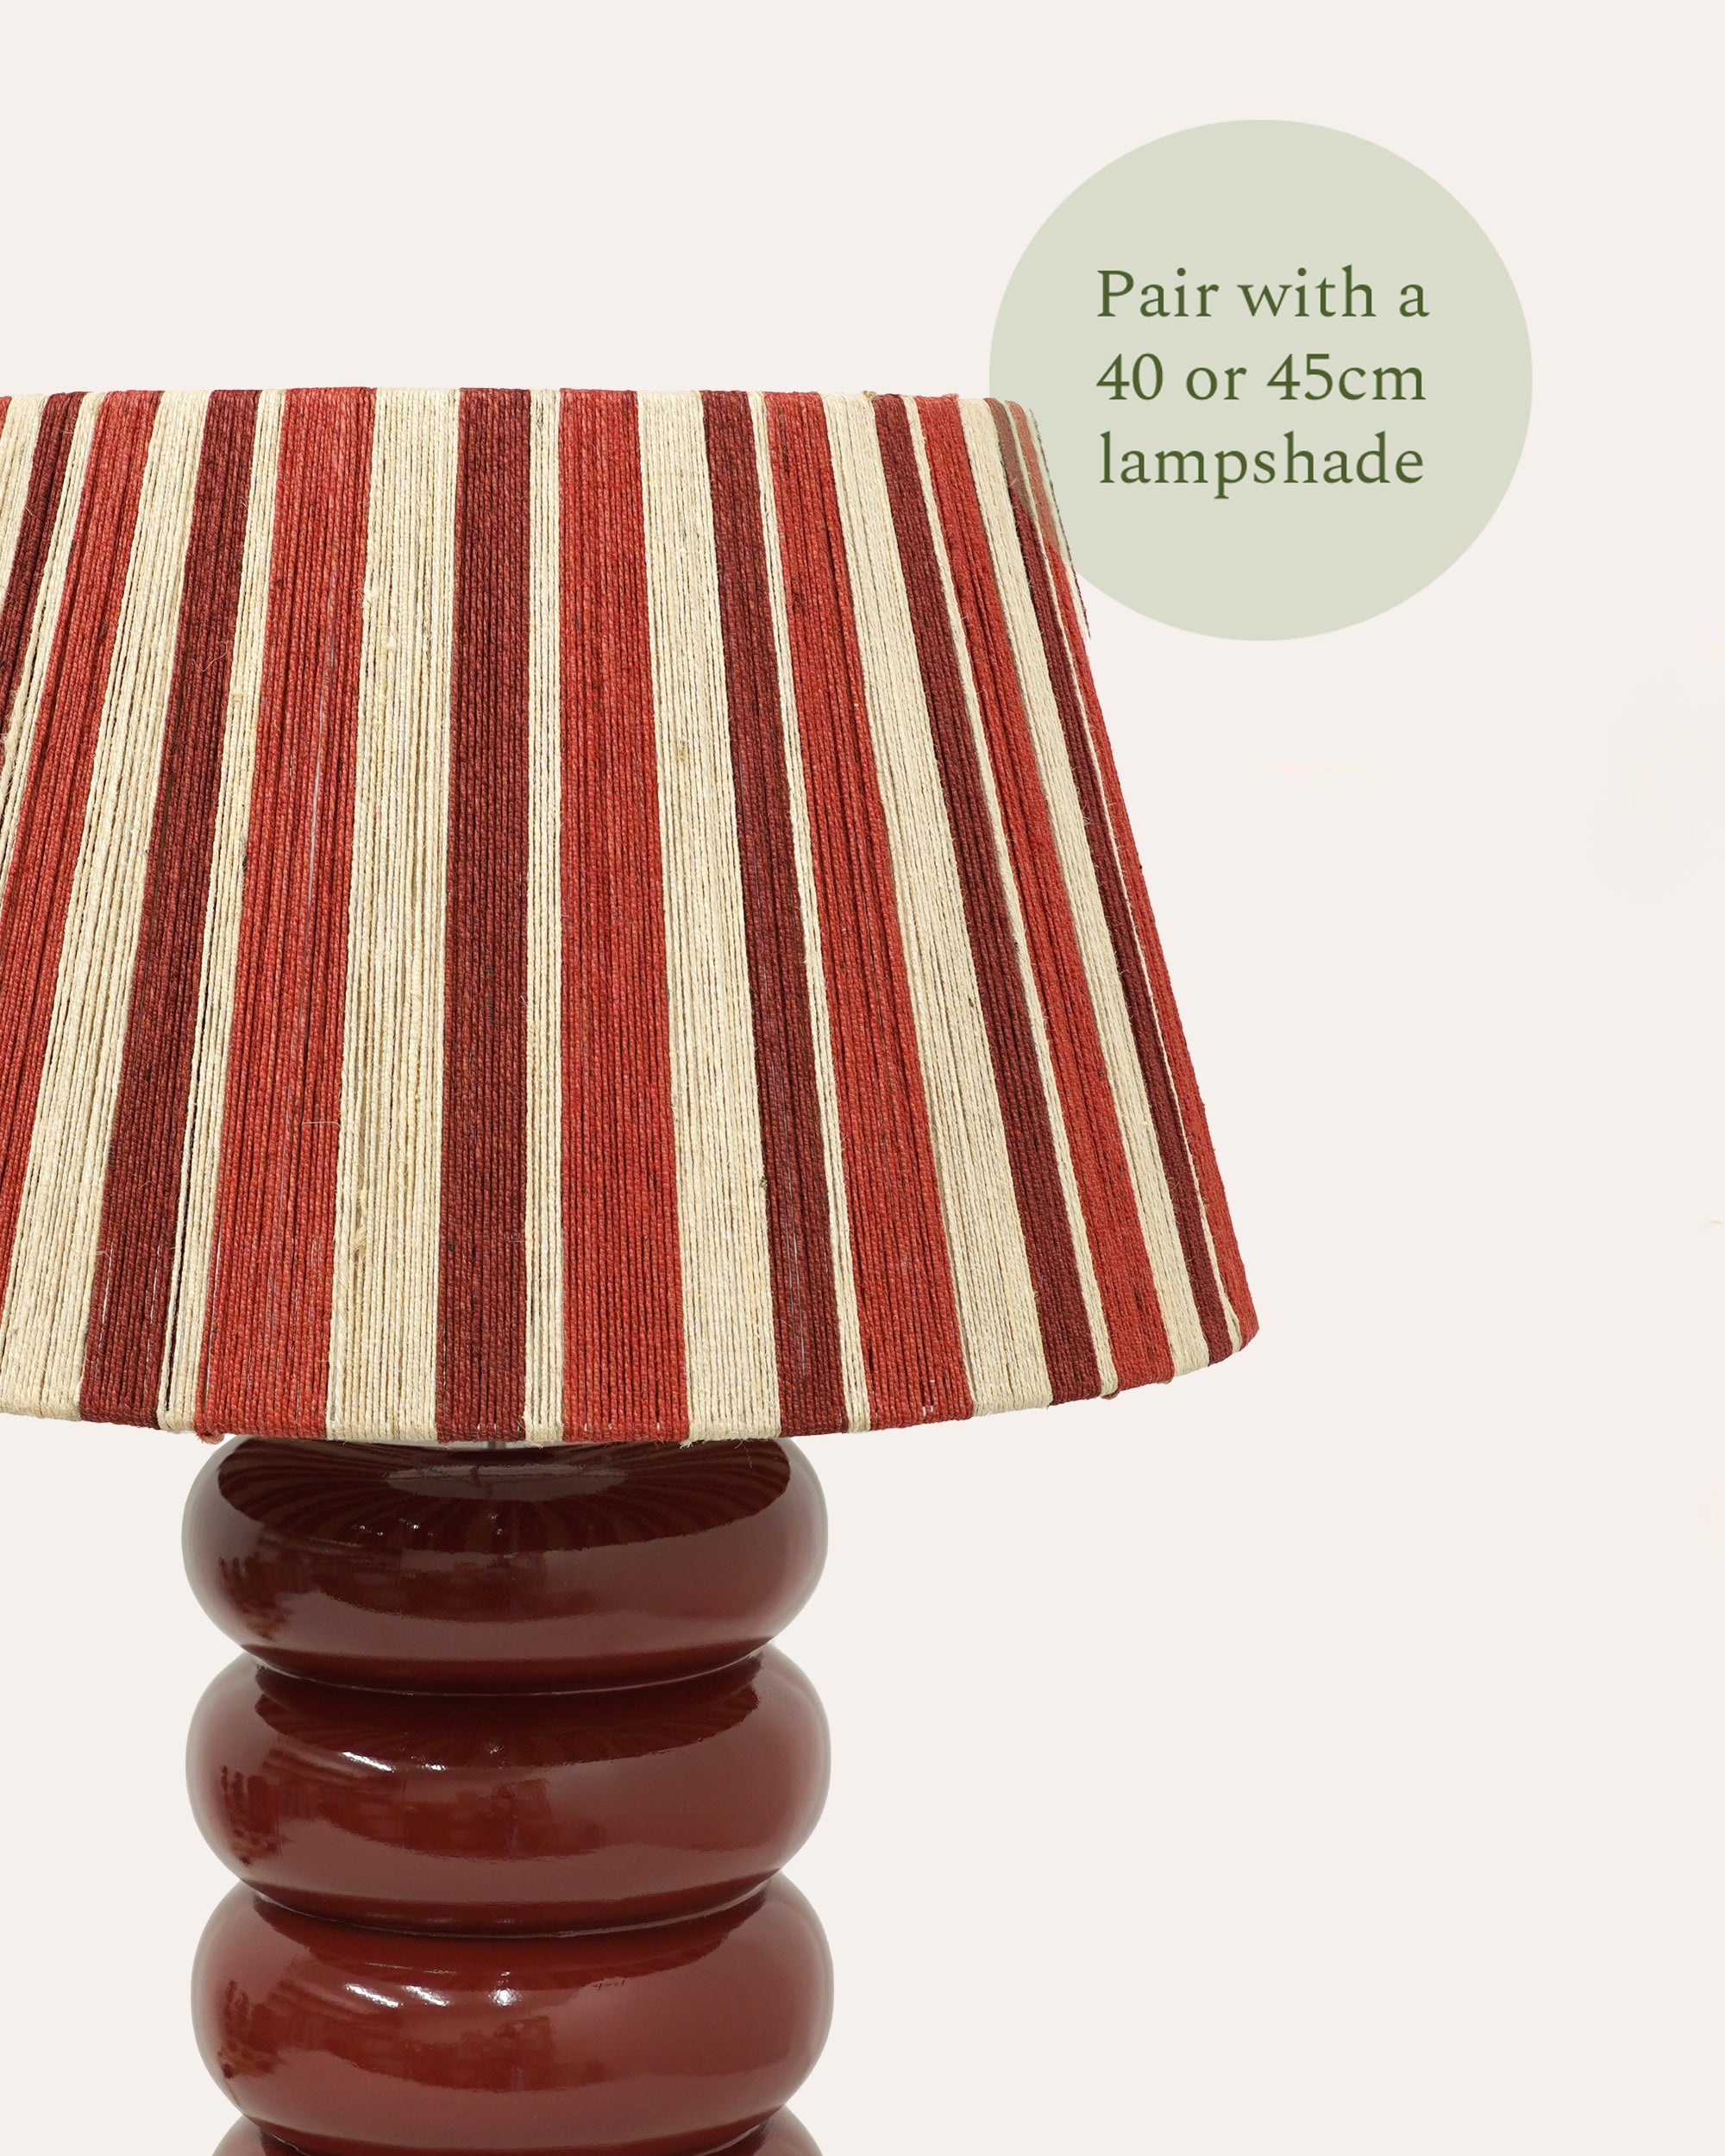 The Must Have Table Lamp - The Bold Red